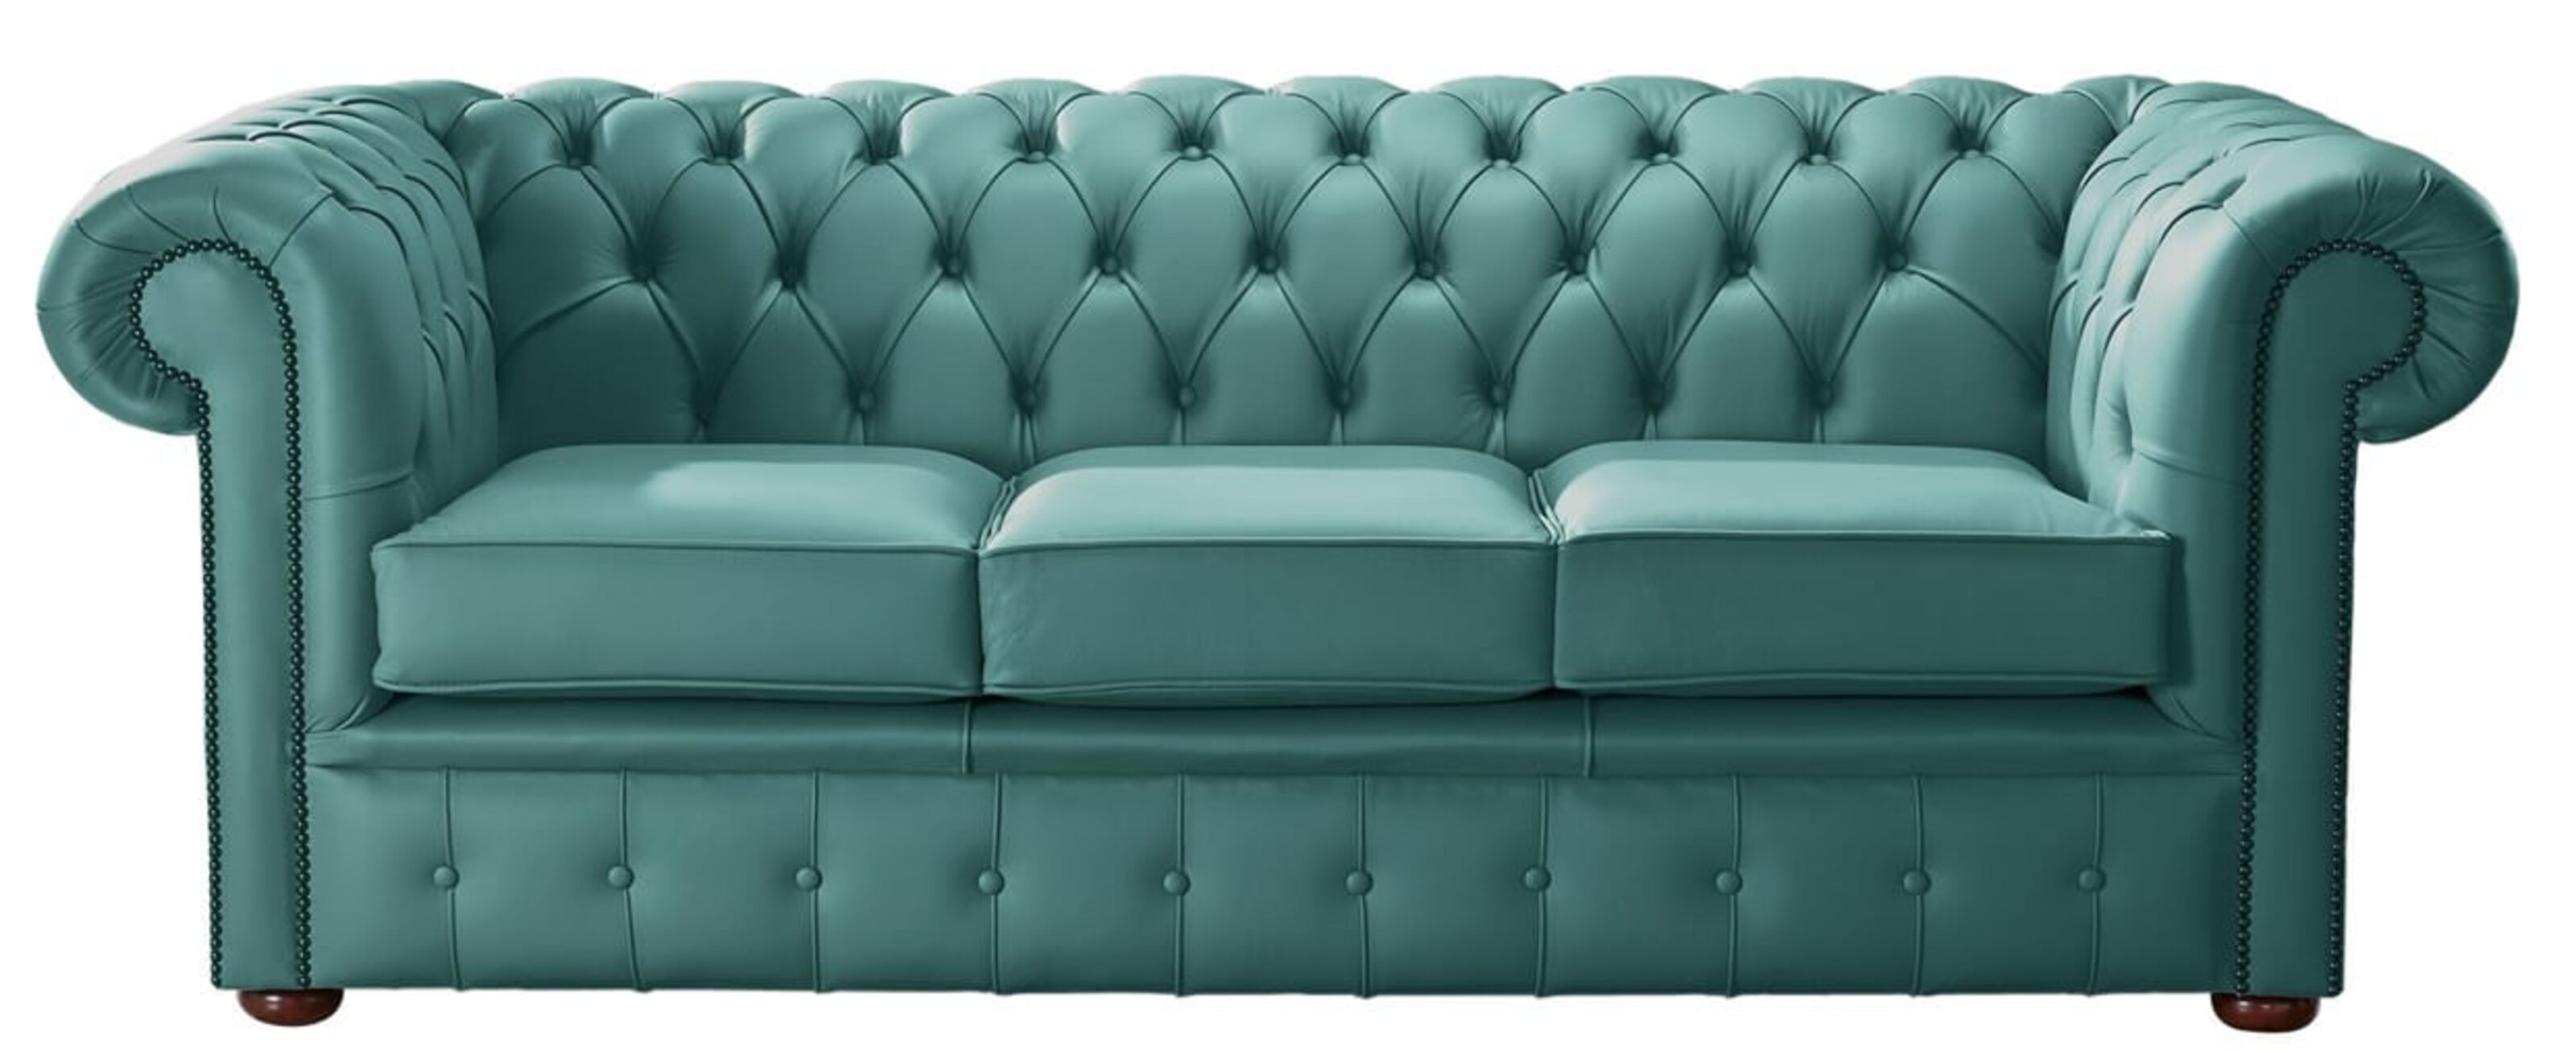 teal leather sofa for sale in okc